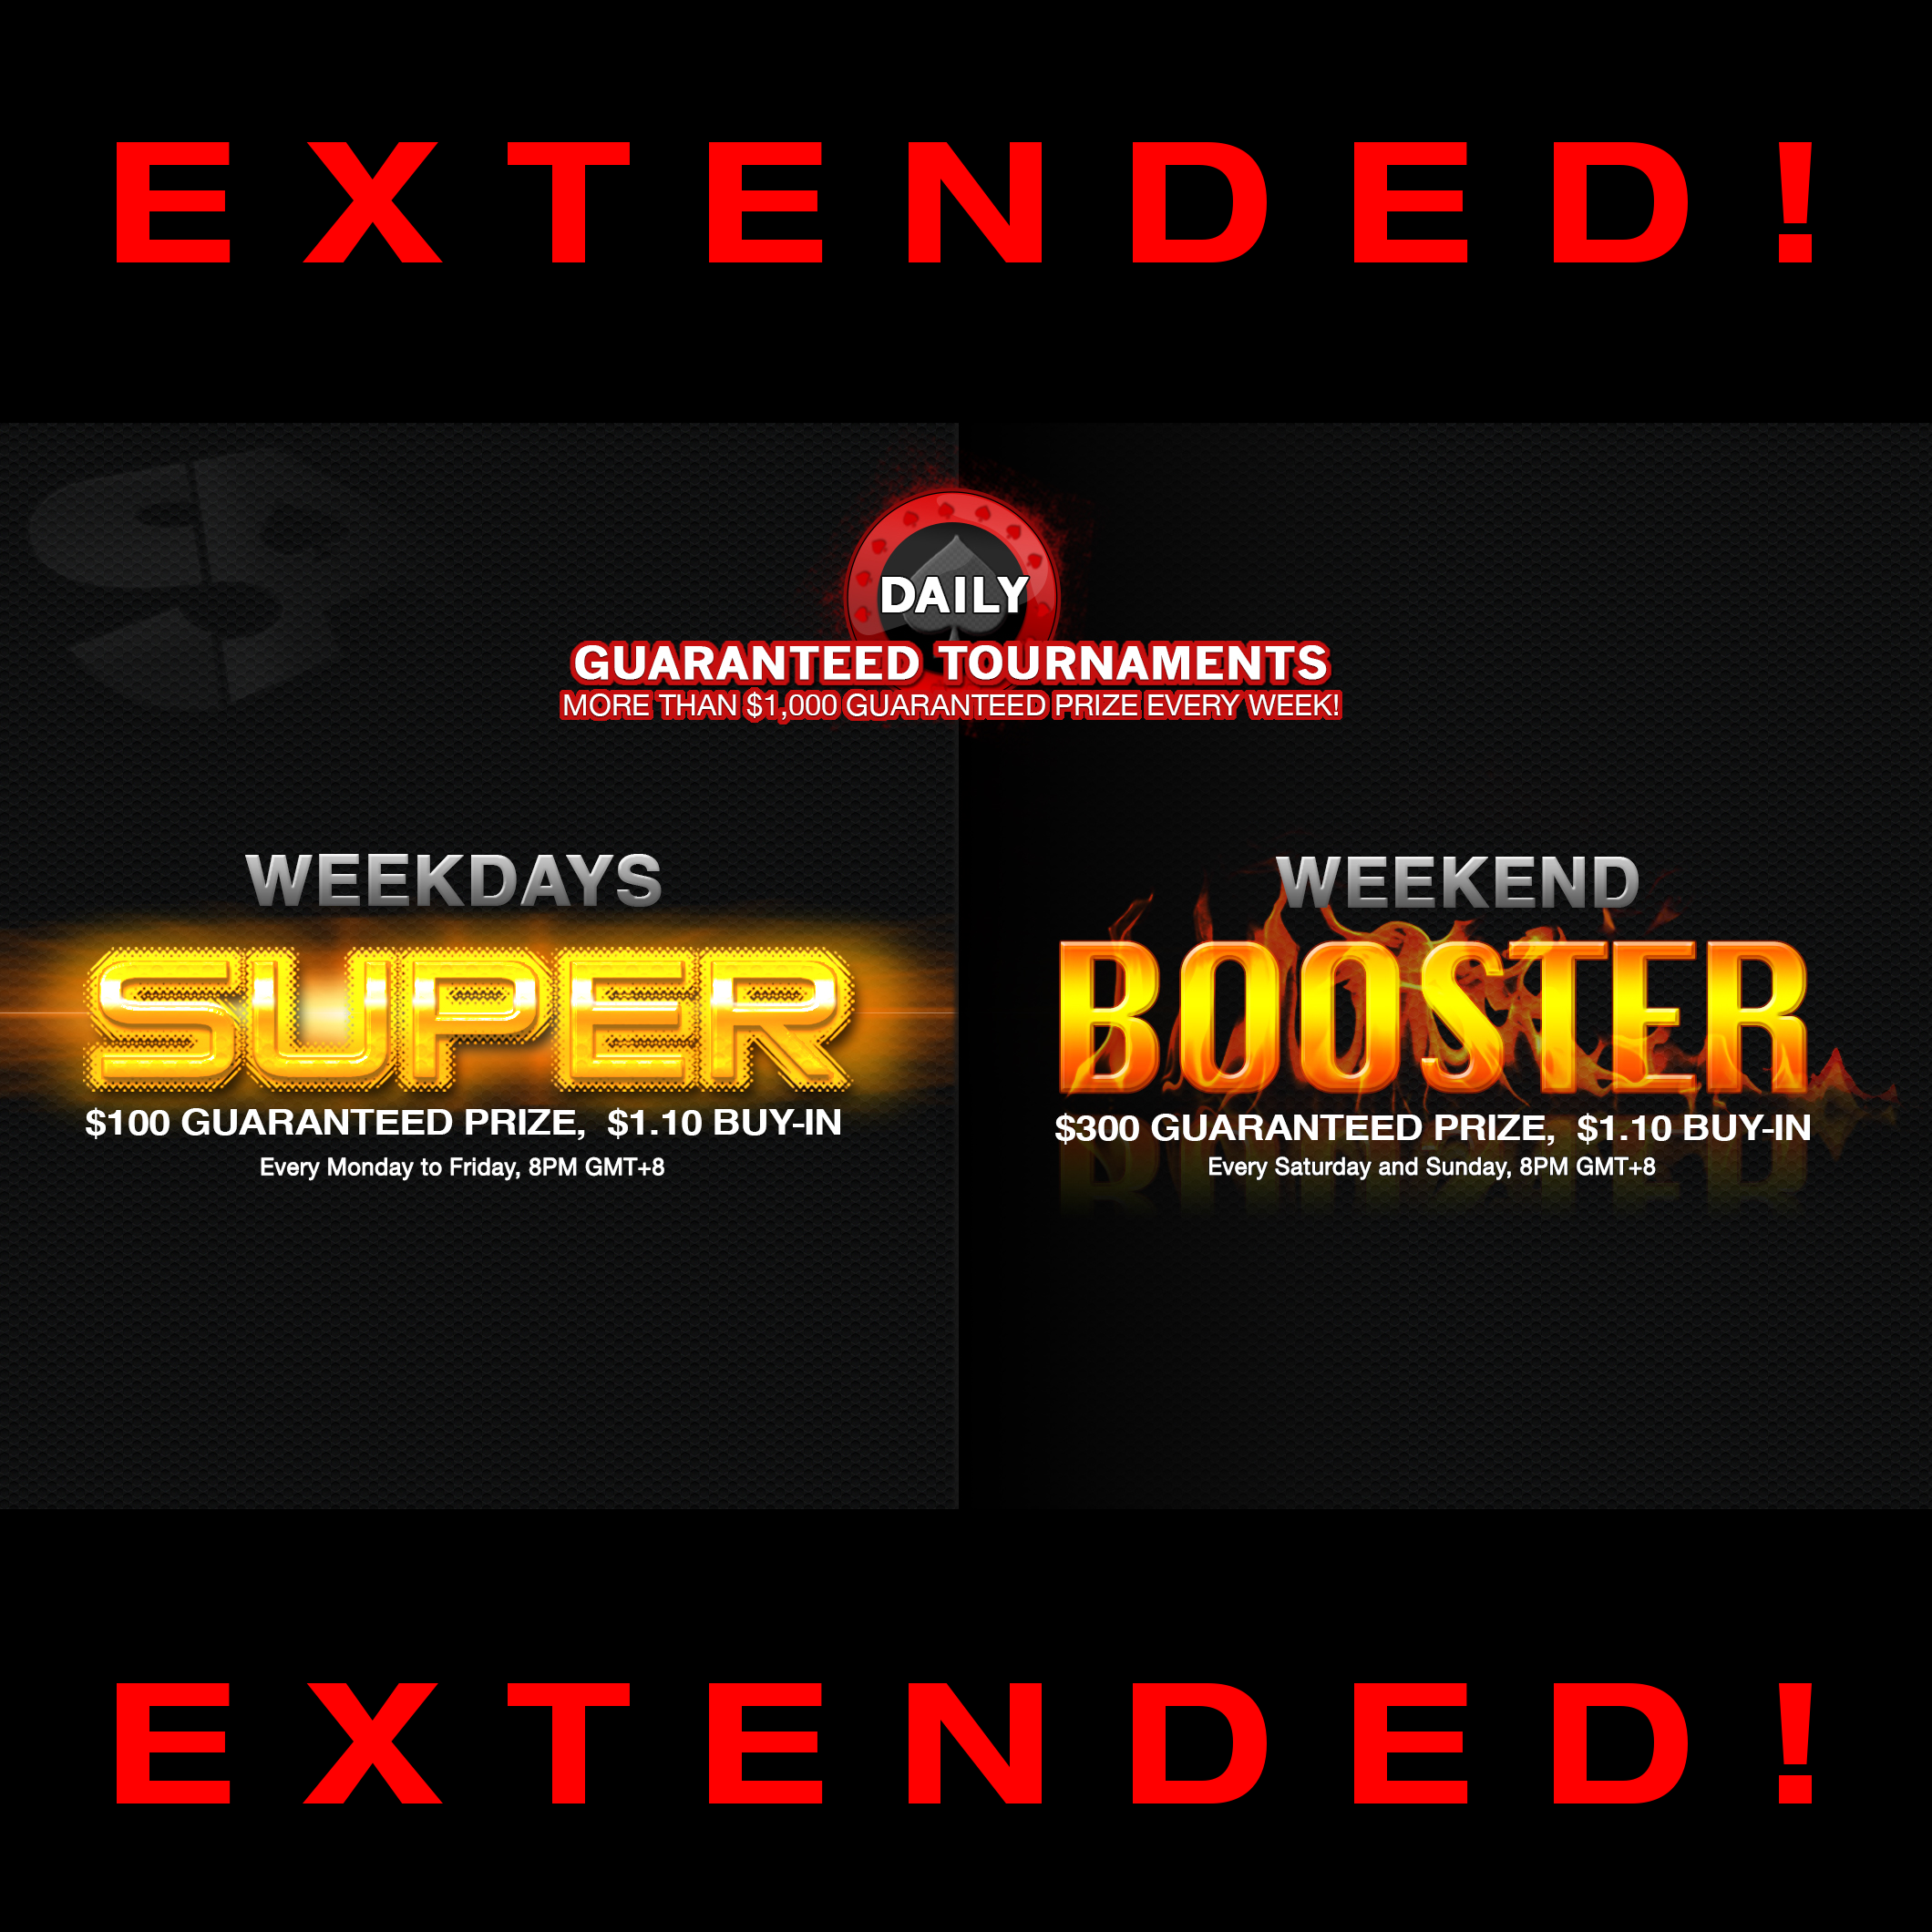 SuitedAce's Guaranteed Tournaments Extended!